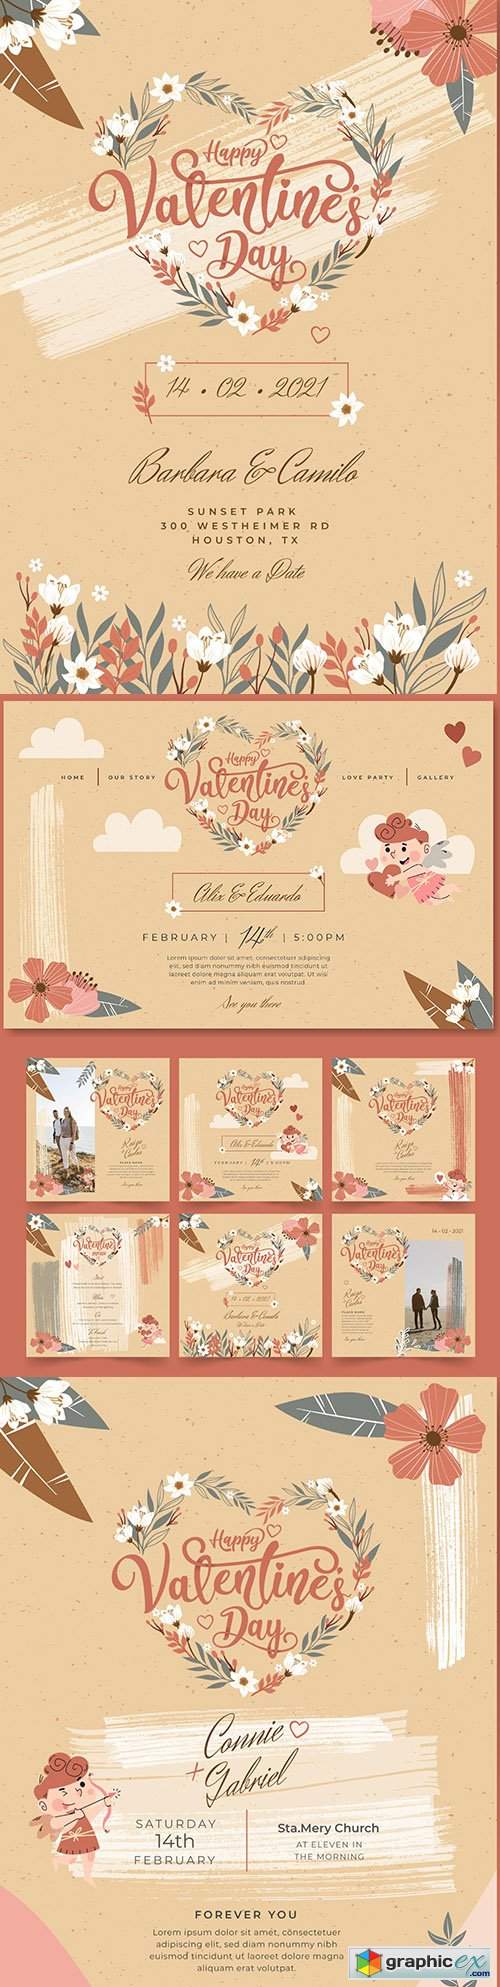  Valentine's Day postcard and instagram messages 